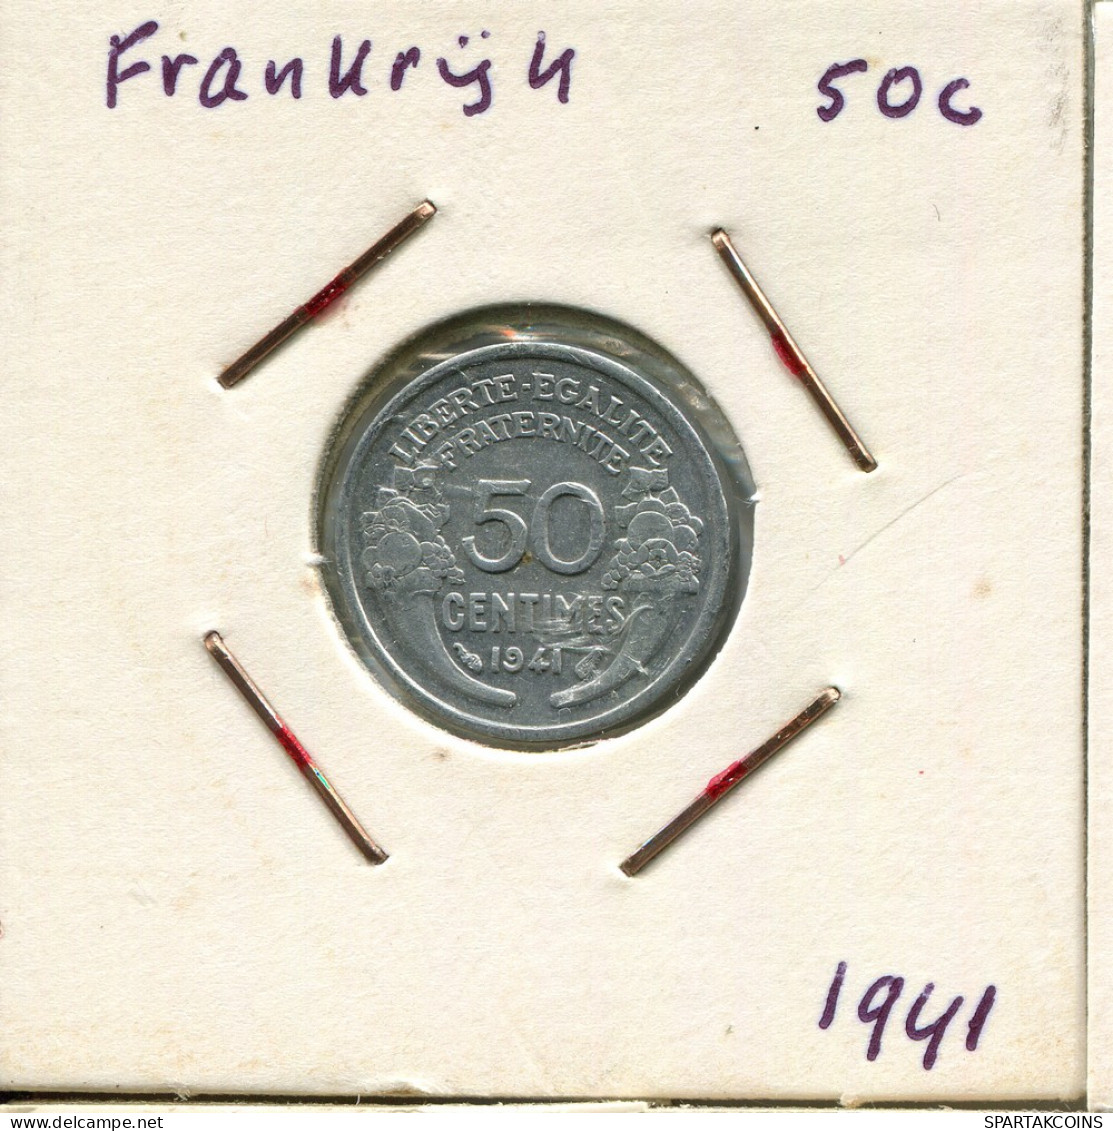 50 CENTIMES 1941 FRANCE French Coin #AM906 - 50 Centimes